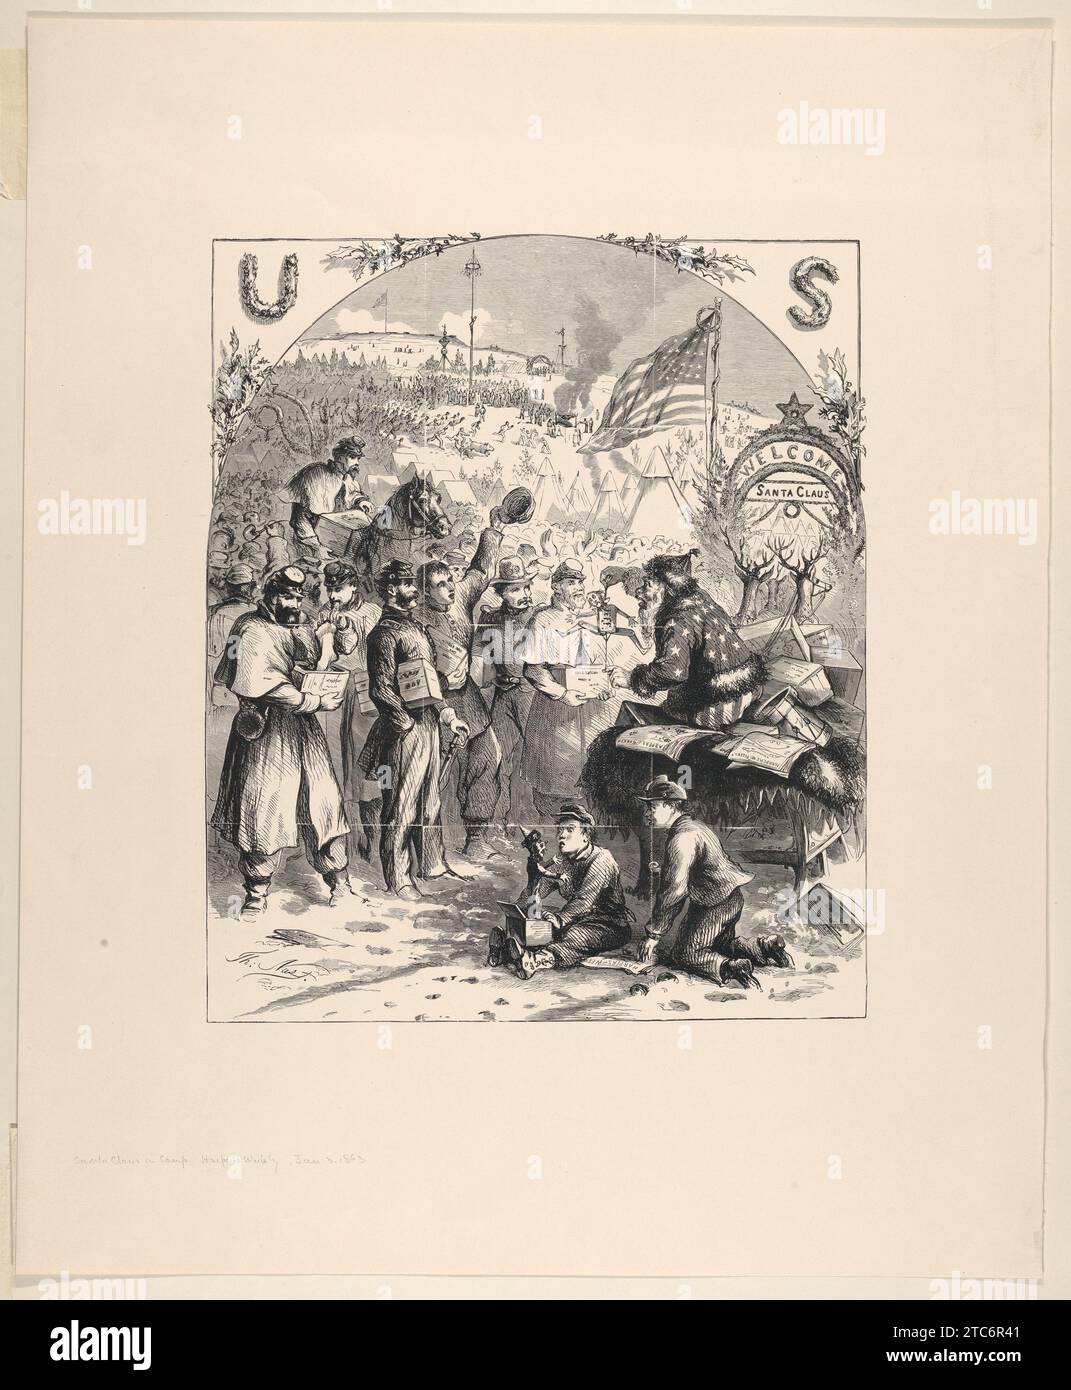 Santa Claus in Camp (published in 'Harper's Weekly,' January 3, 1863) 1933 by Thomas Nast Stock Photo